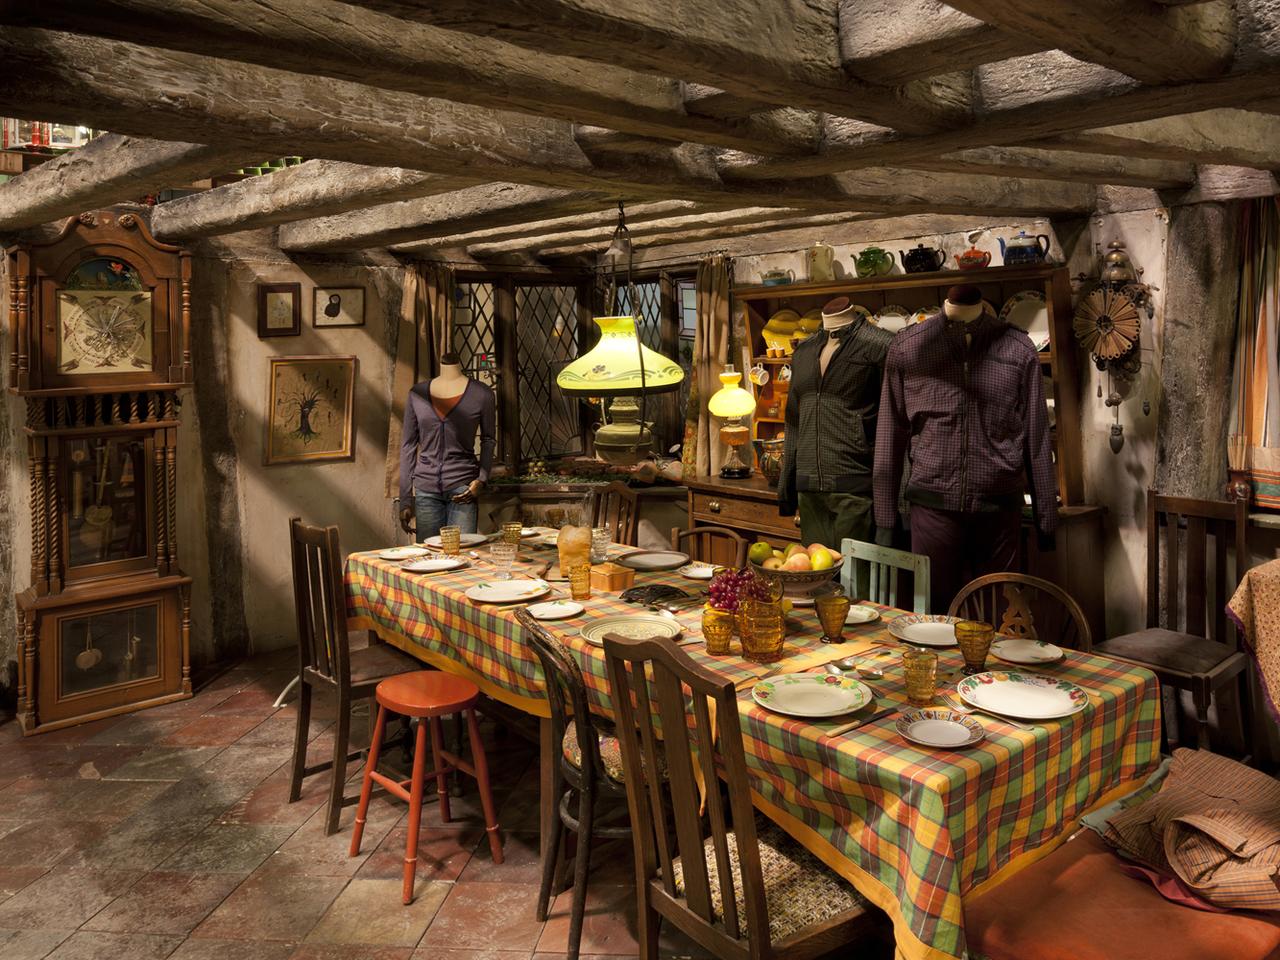 The Weasley kitchen in the Harry Potter series of films, seen during a walking tour of Warner Bros studios in London.